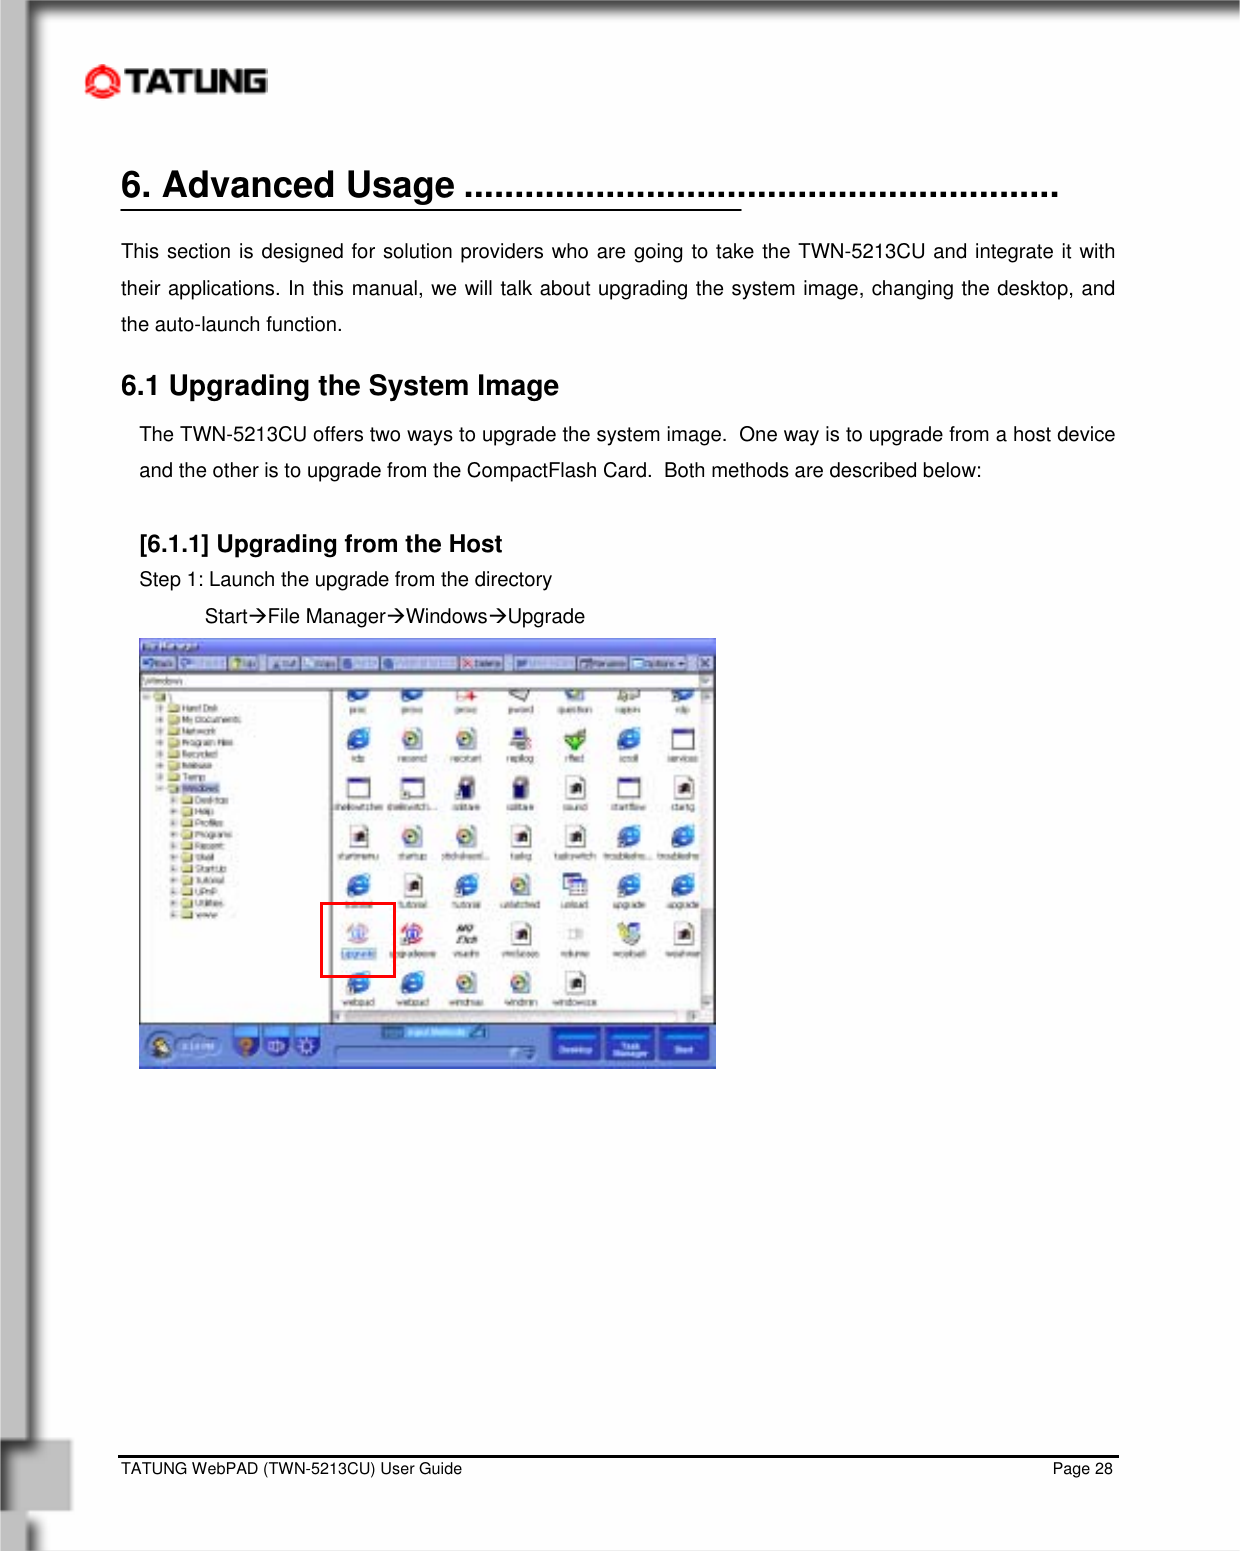    TATUNG WebPAD (TWN-5213CU) User Guide                                                                                                                                   Page 28 6. Advanced Usage ...........................................................  This section is designed for solution providers who are going to take the TWN-5213CU and integrate it with their applications. In this manual, we will talk about upgrading the system image, changing the desktop, and the auto-launch function.  6.1 Upgrading the System Image The TWN-5213CU offers two ways to upgrade the system image.  One way is to upgrade from a host device and the other is to upgrade from the CompactFlash Card.  Both methods are described below:  [6.1.1] Upgrading from the Host Step 1: Launch the upgrade from the directory StartÆFile ManagerÆWindowsÆUpgrade           